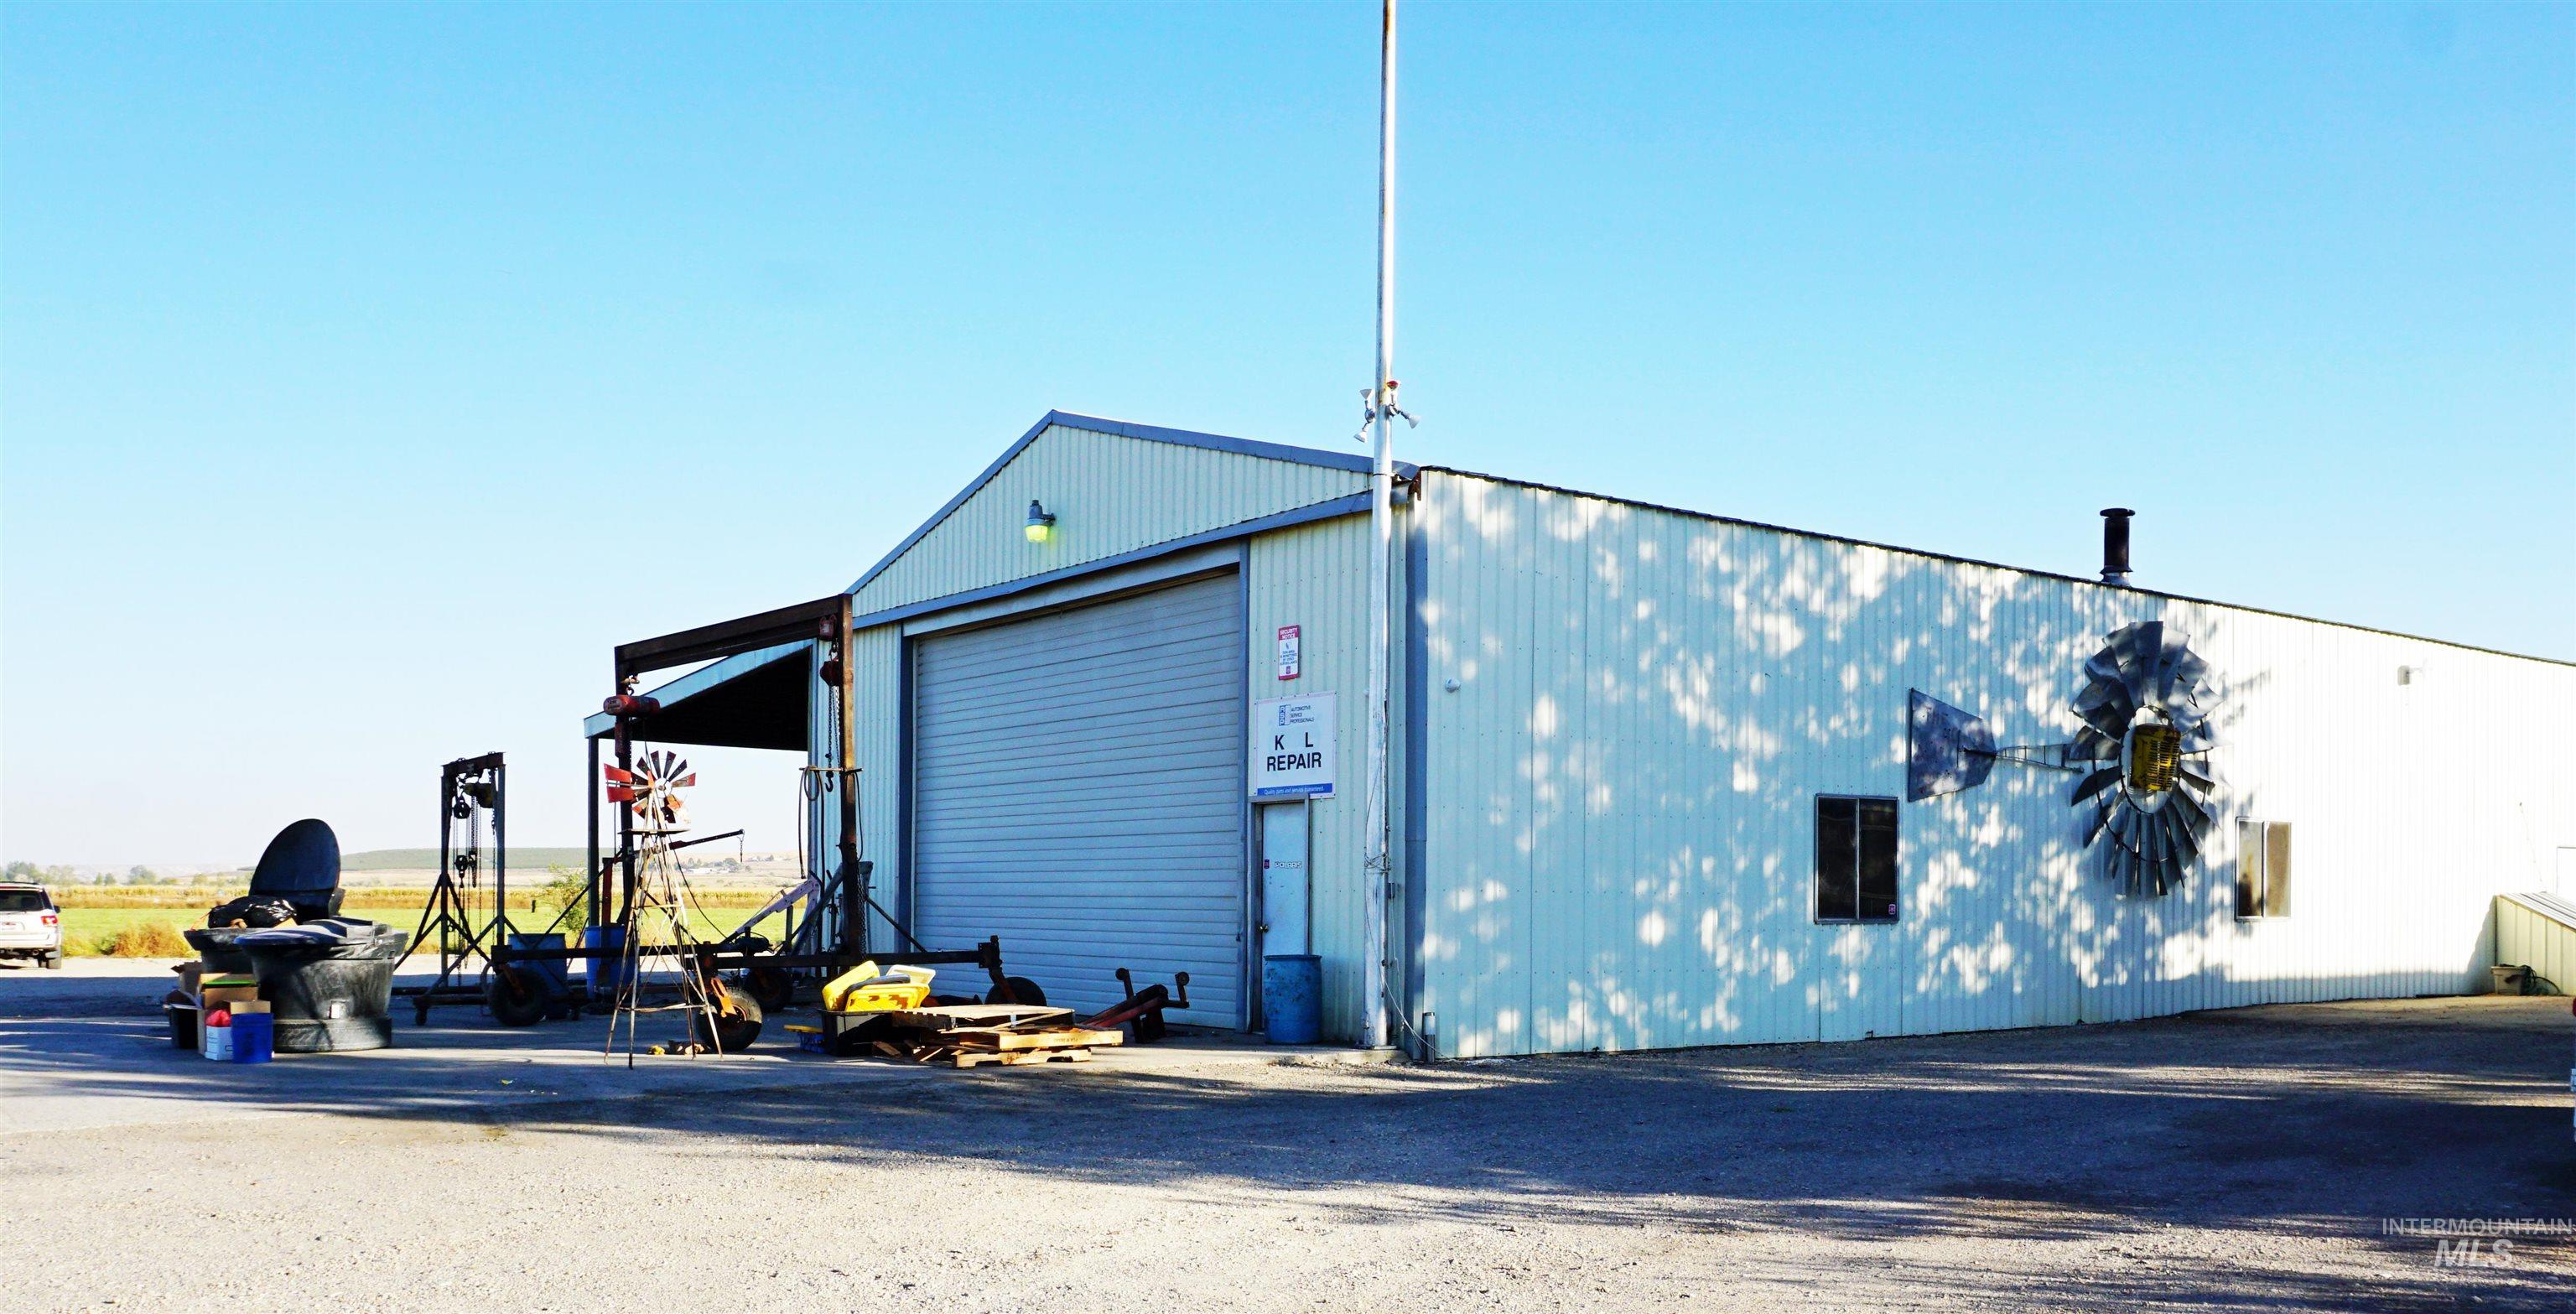 6362 Edison Road, Marsing, Idaho 83639, Business/Commercial For Sale, Price $649,900,MLS 98863133